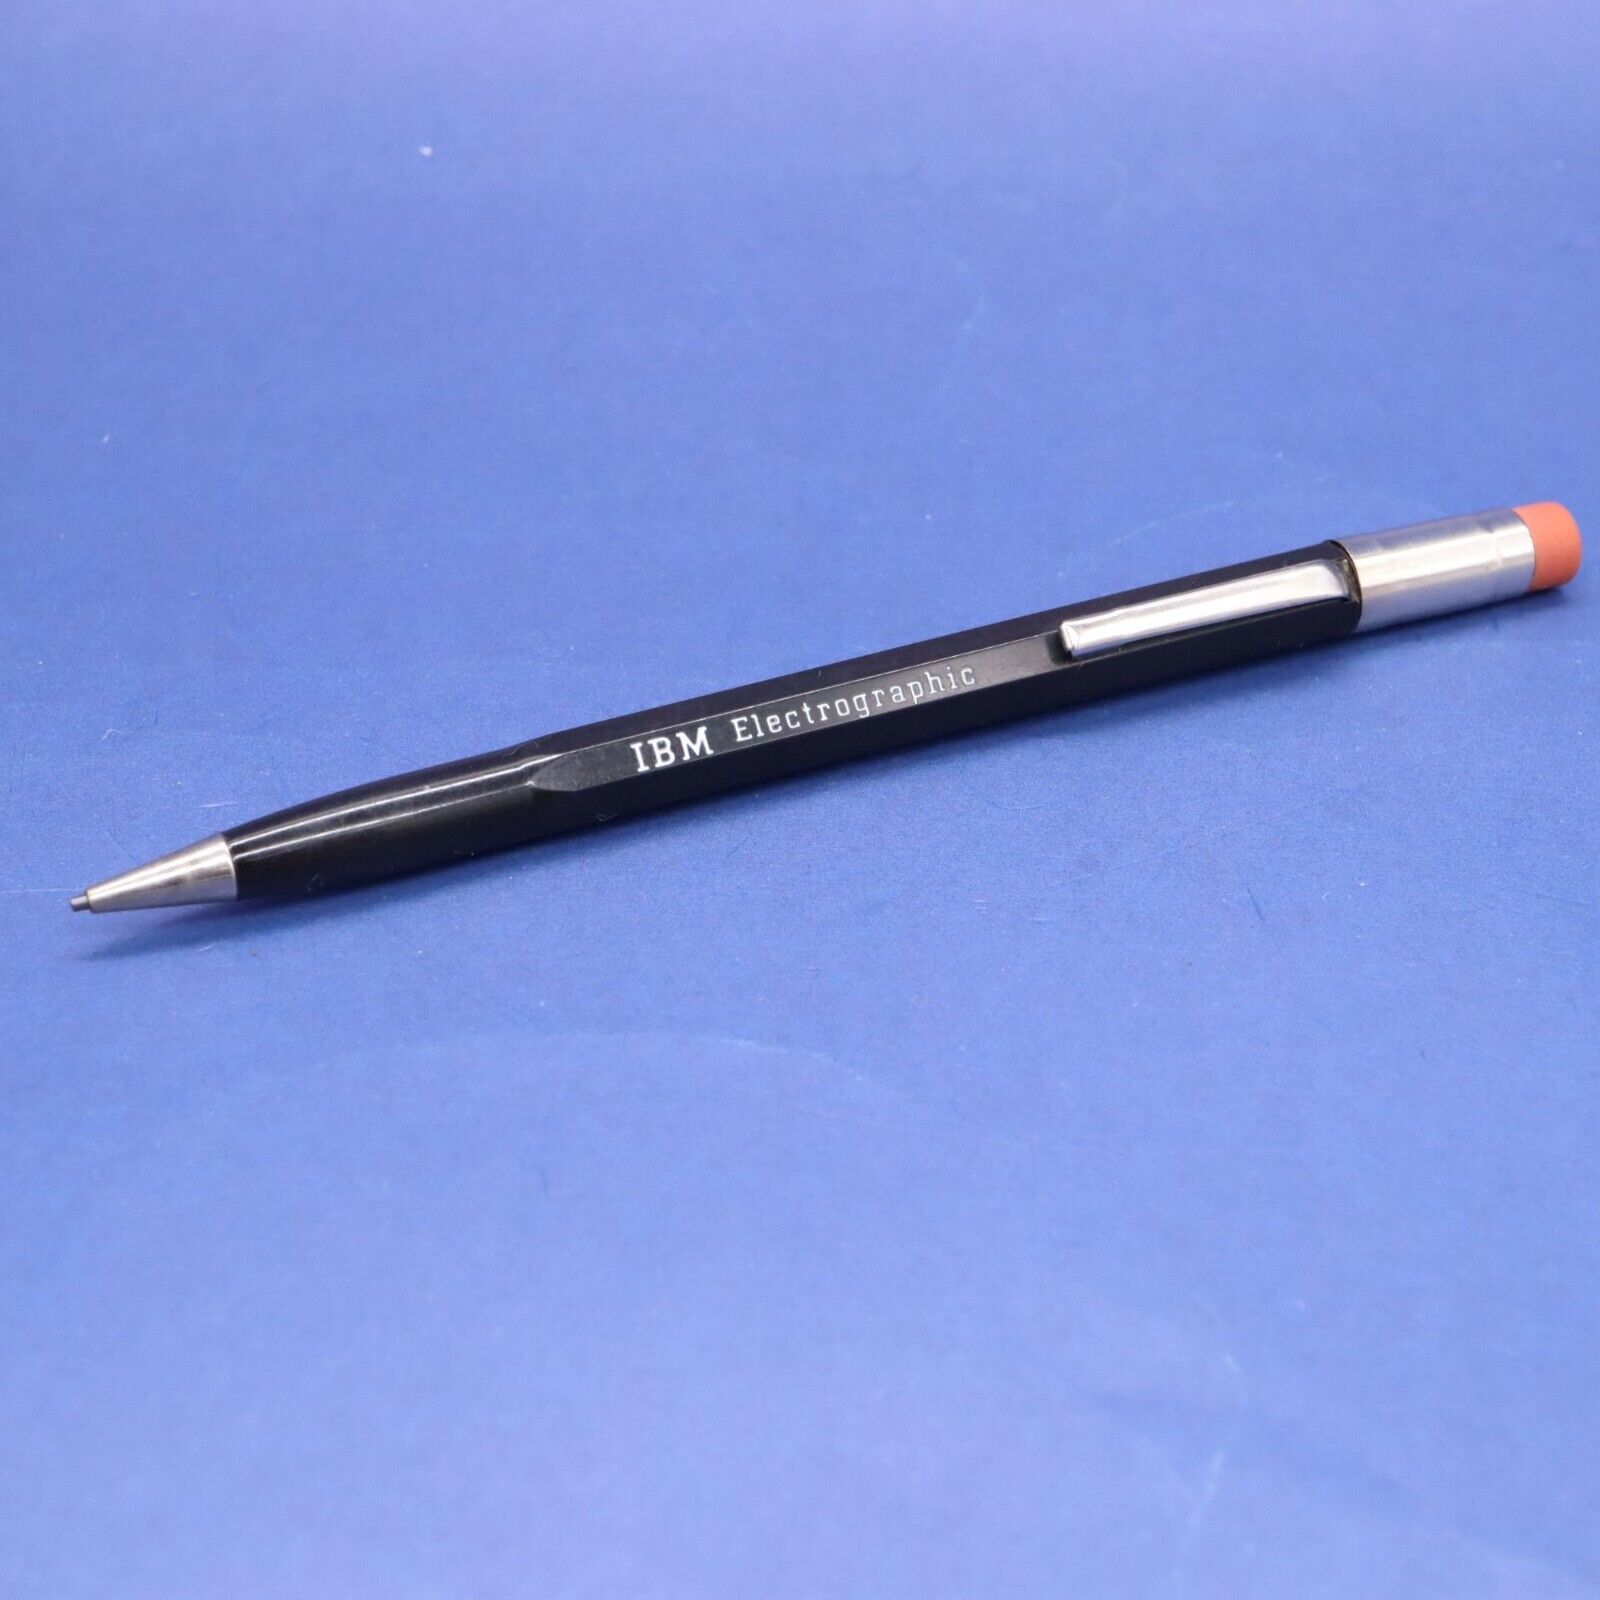 Vintage IBM ELECTROGRAPHIC Mechanical Pencil with Lead & Eraser